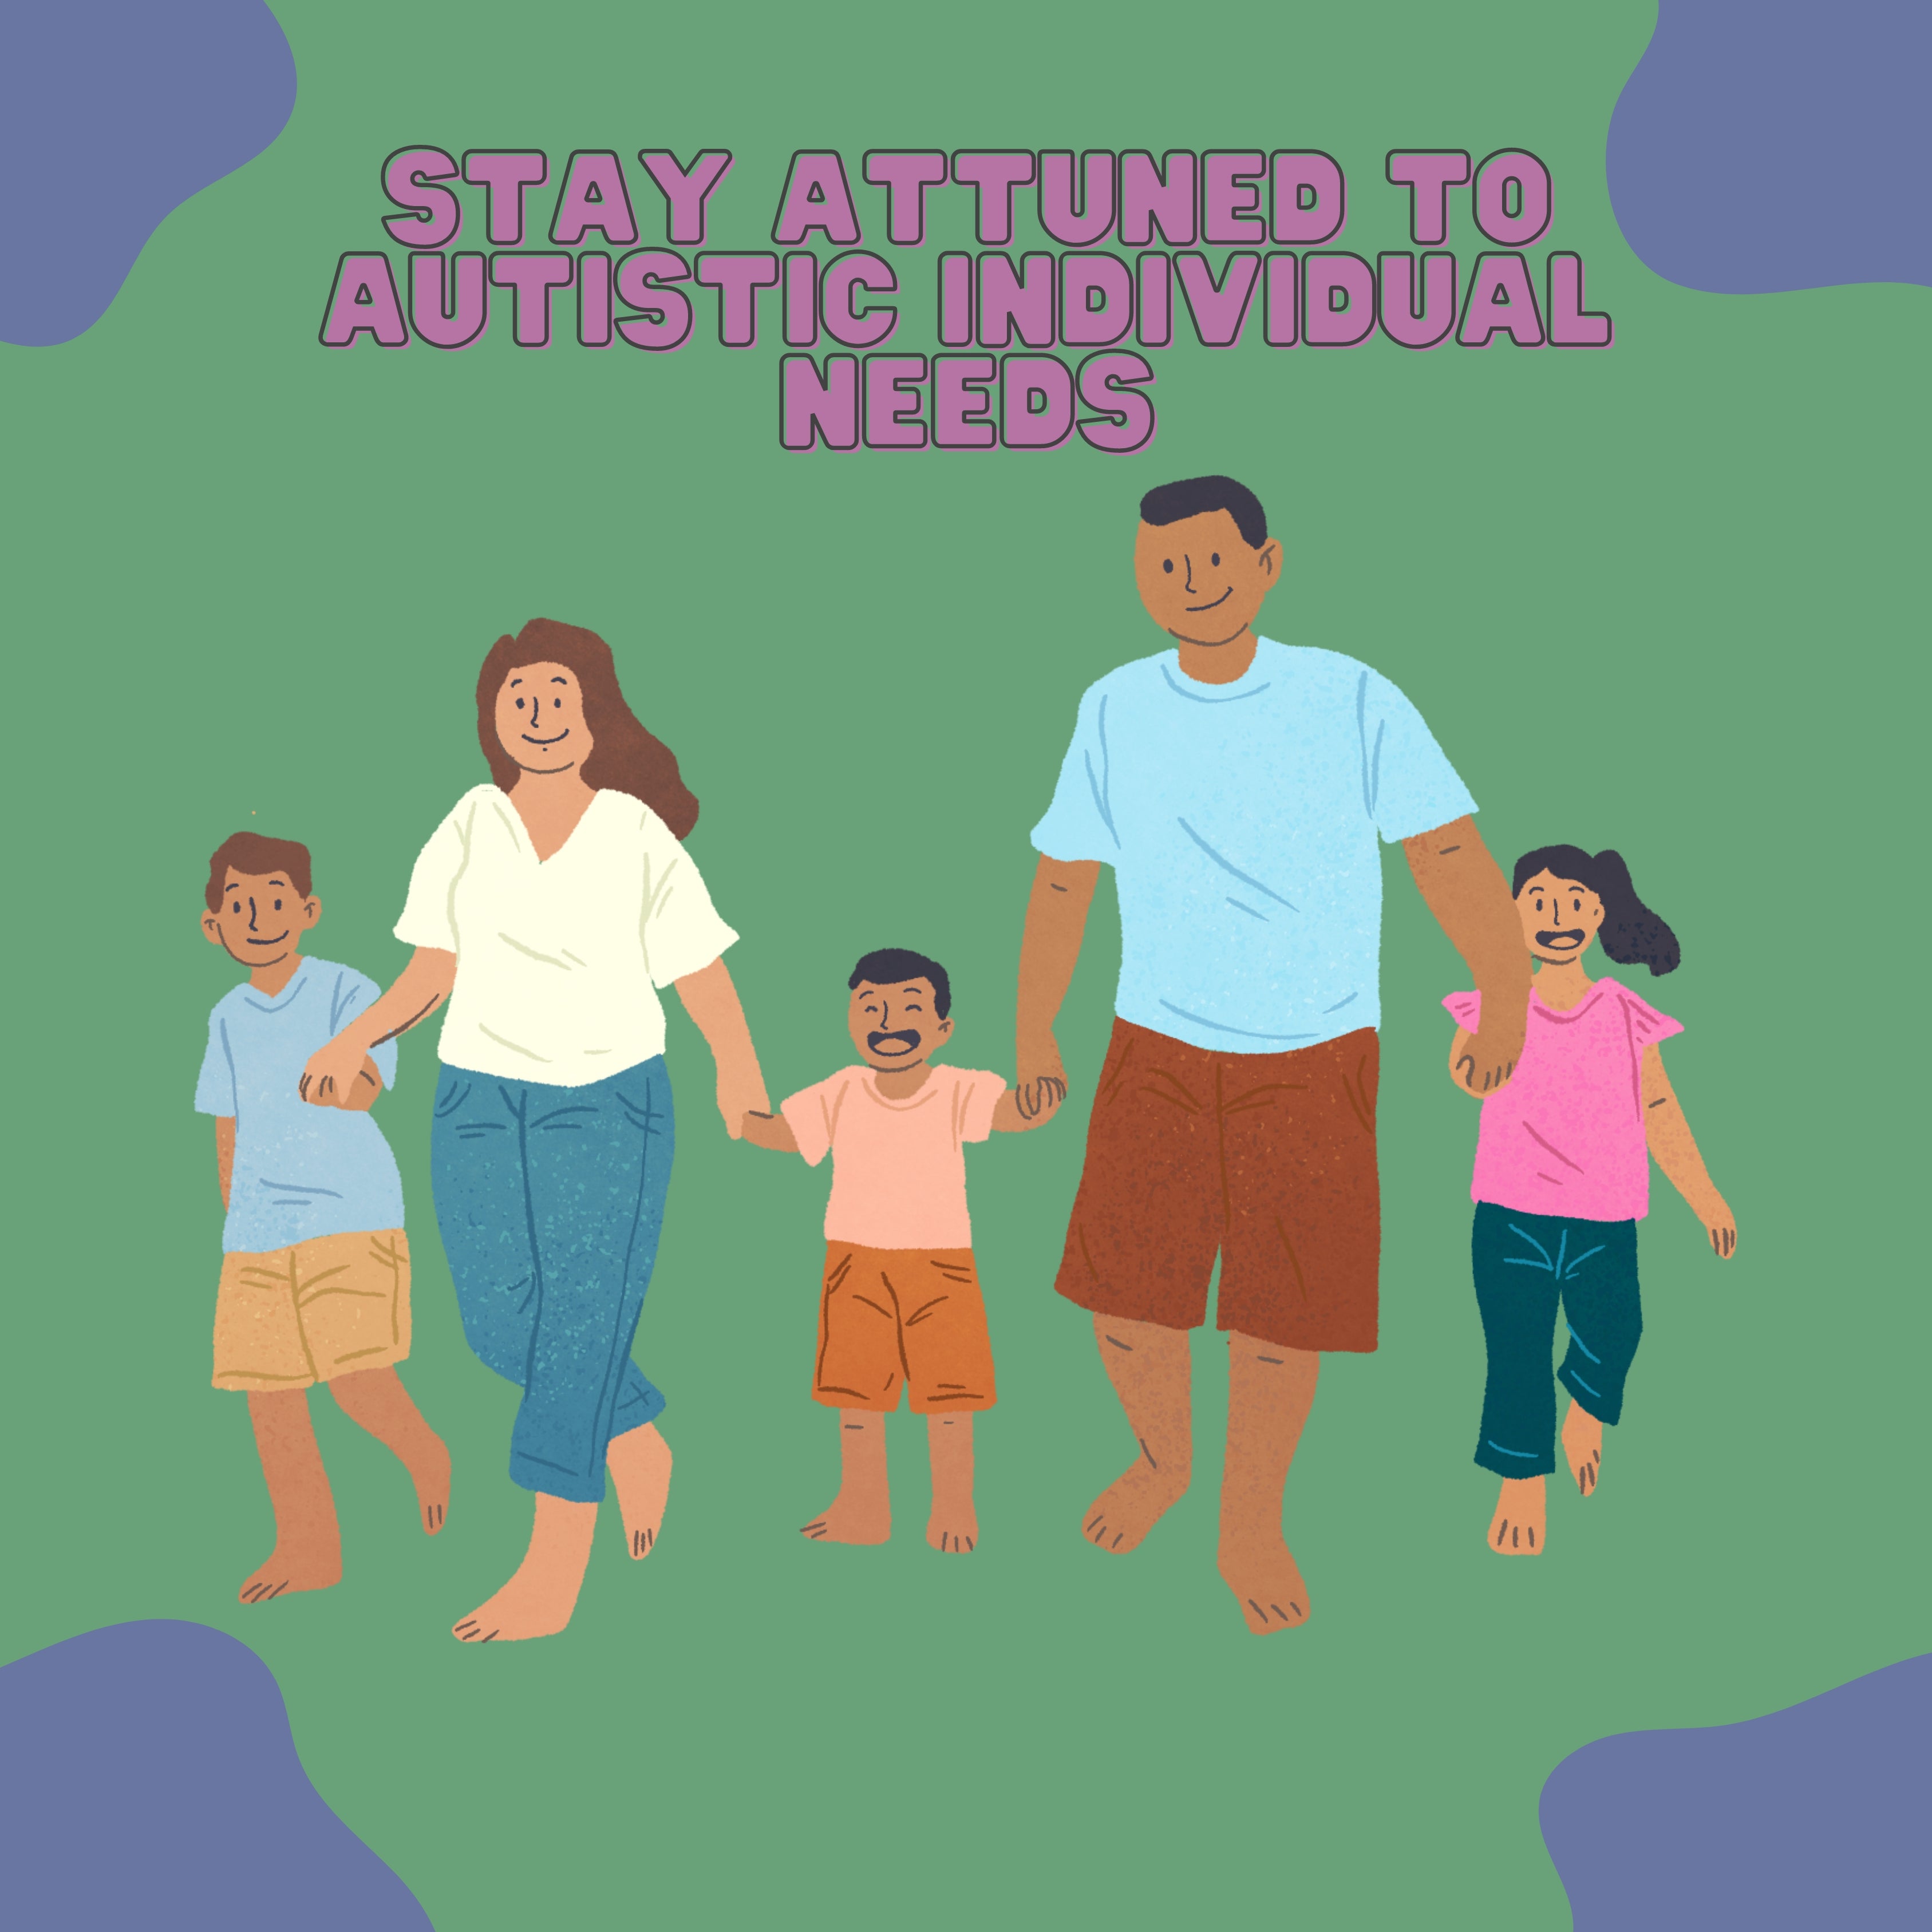 Stay Attuned to Autistic Individual Needs